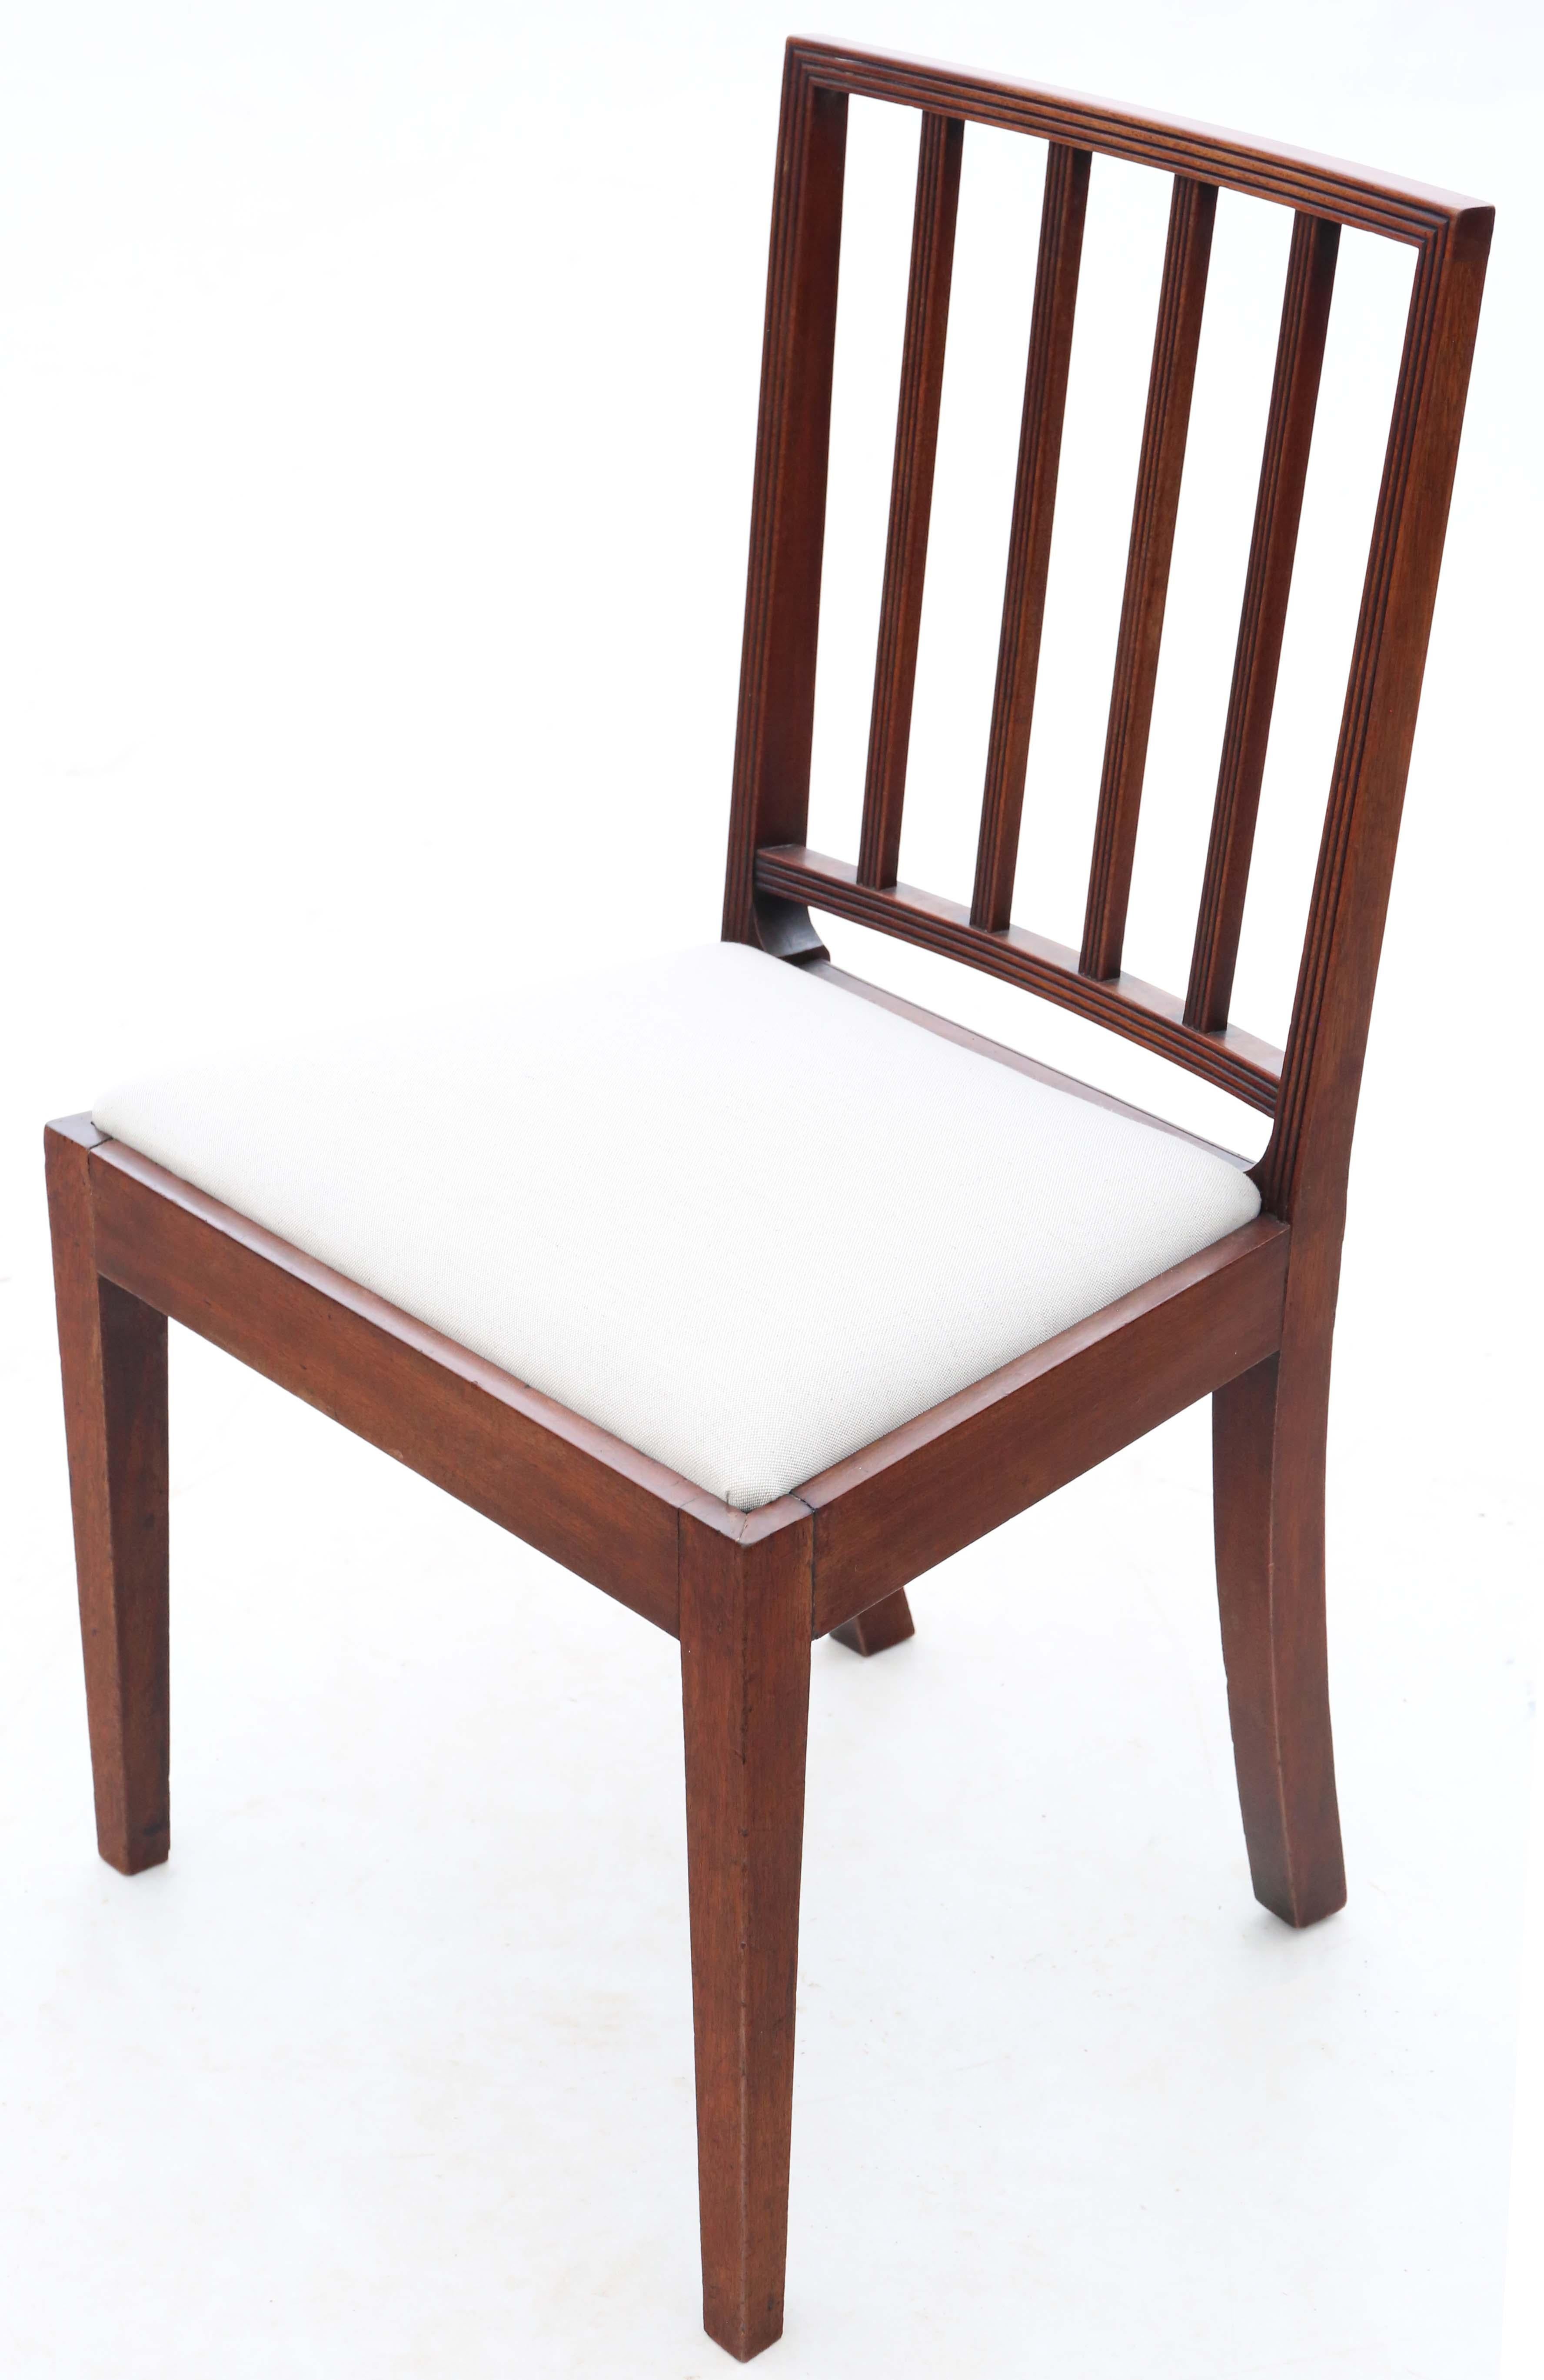 Mahogany Dining Chairs: Set of 8 (6+2), Antique Quality, C1820 For Sale 1